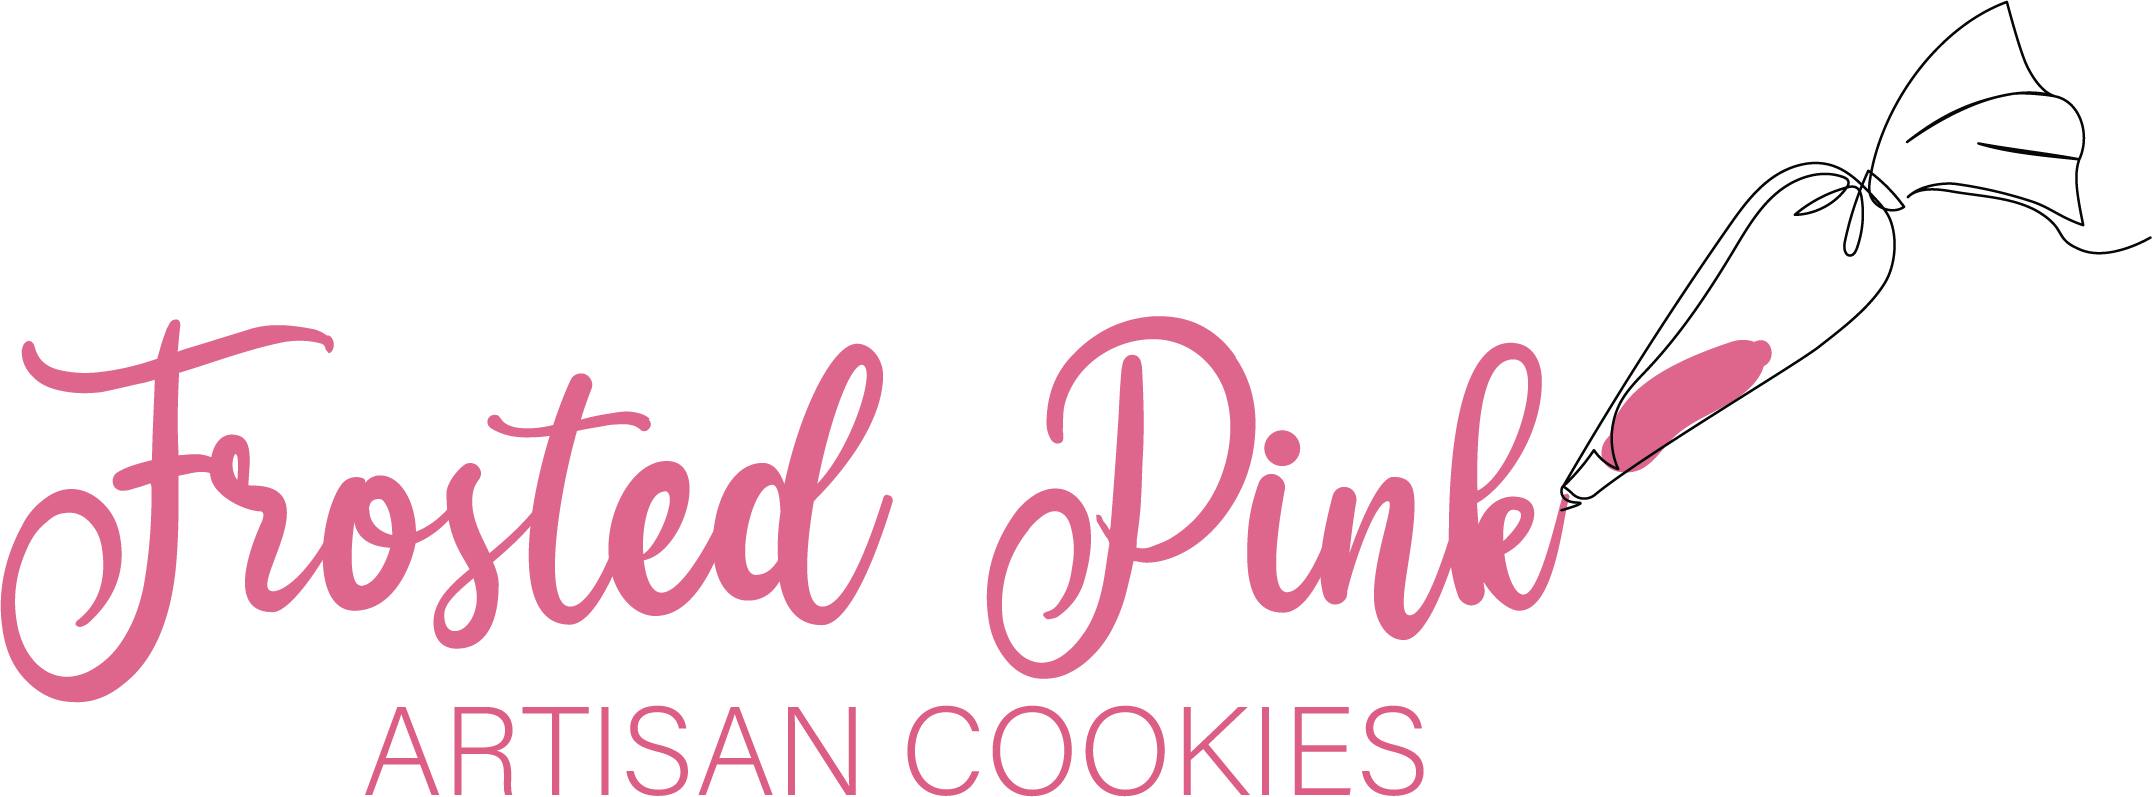 Frosted Pink Artisan Cookies Logo